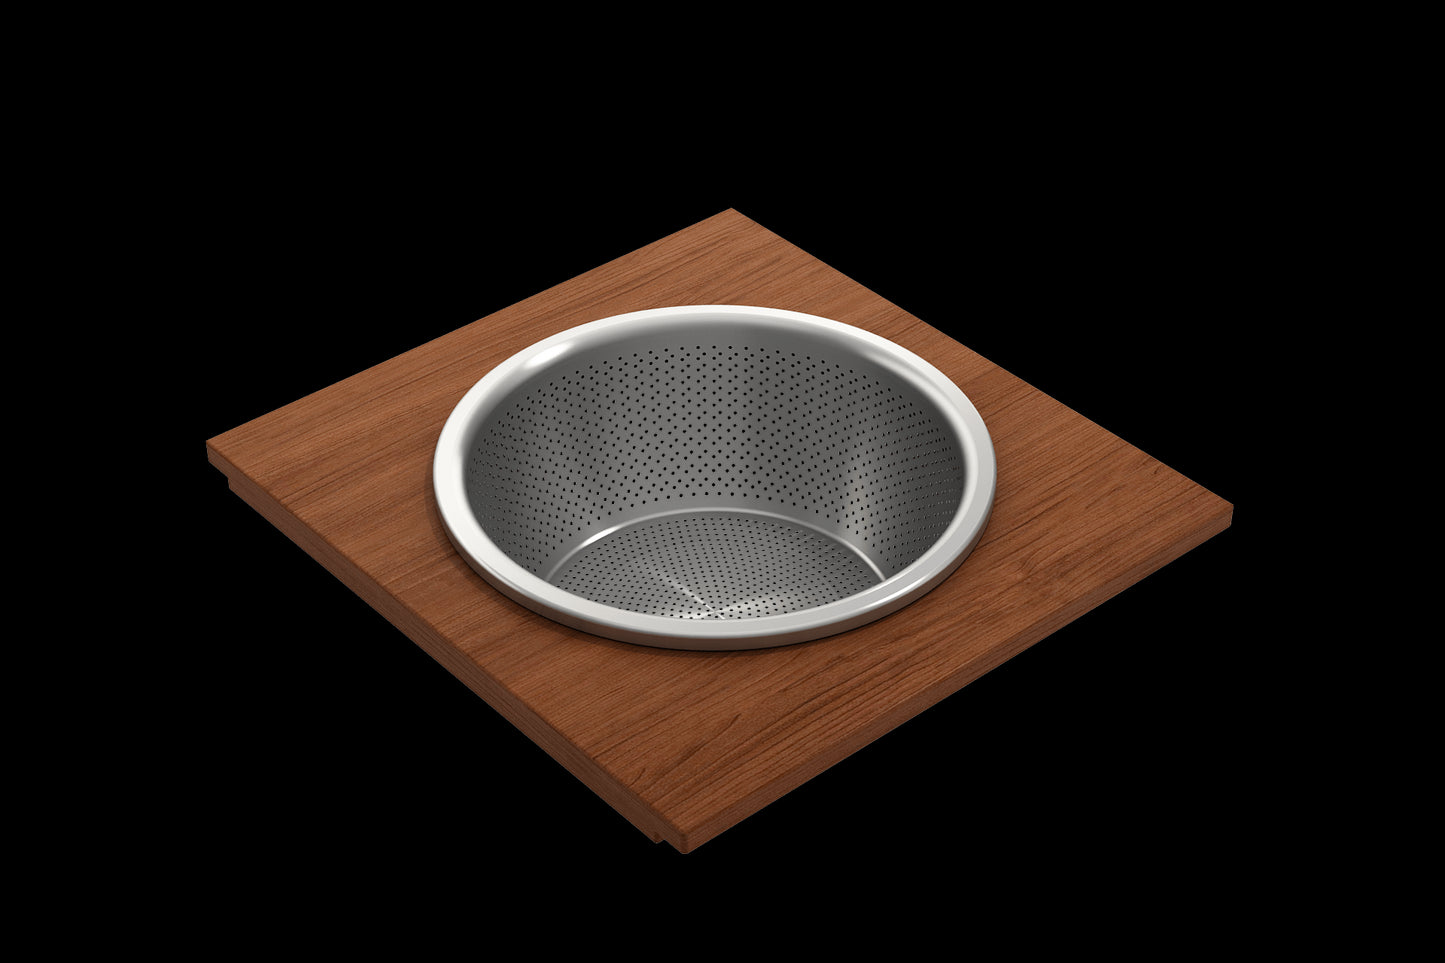 BOCCHI Wood Board with Large Round Stainless Steel Mixing Bowl and Colander F/1616, 1618, 1633 (inner ledge)